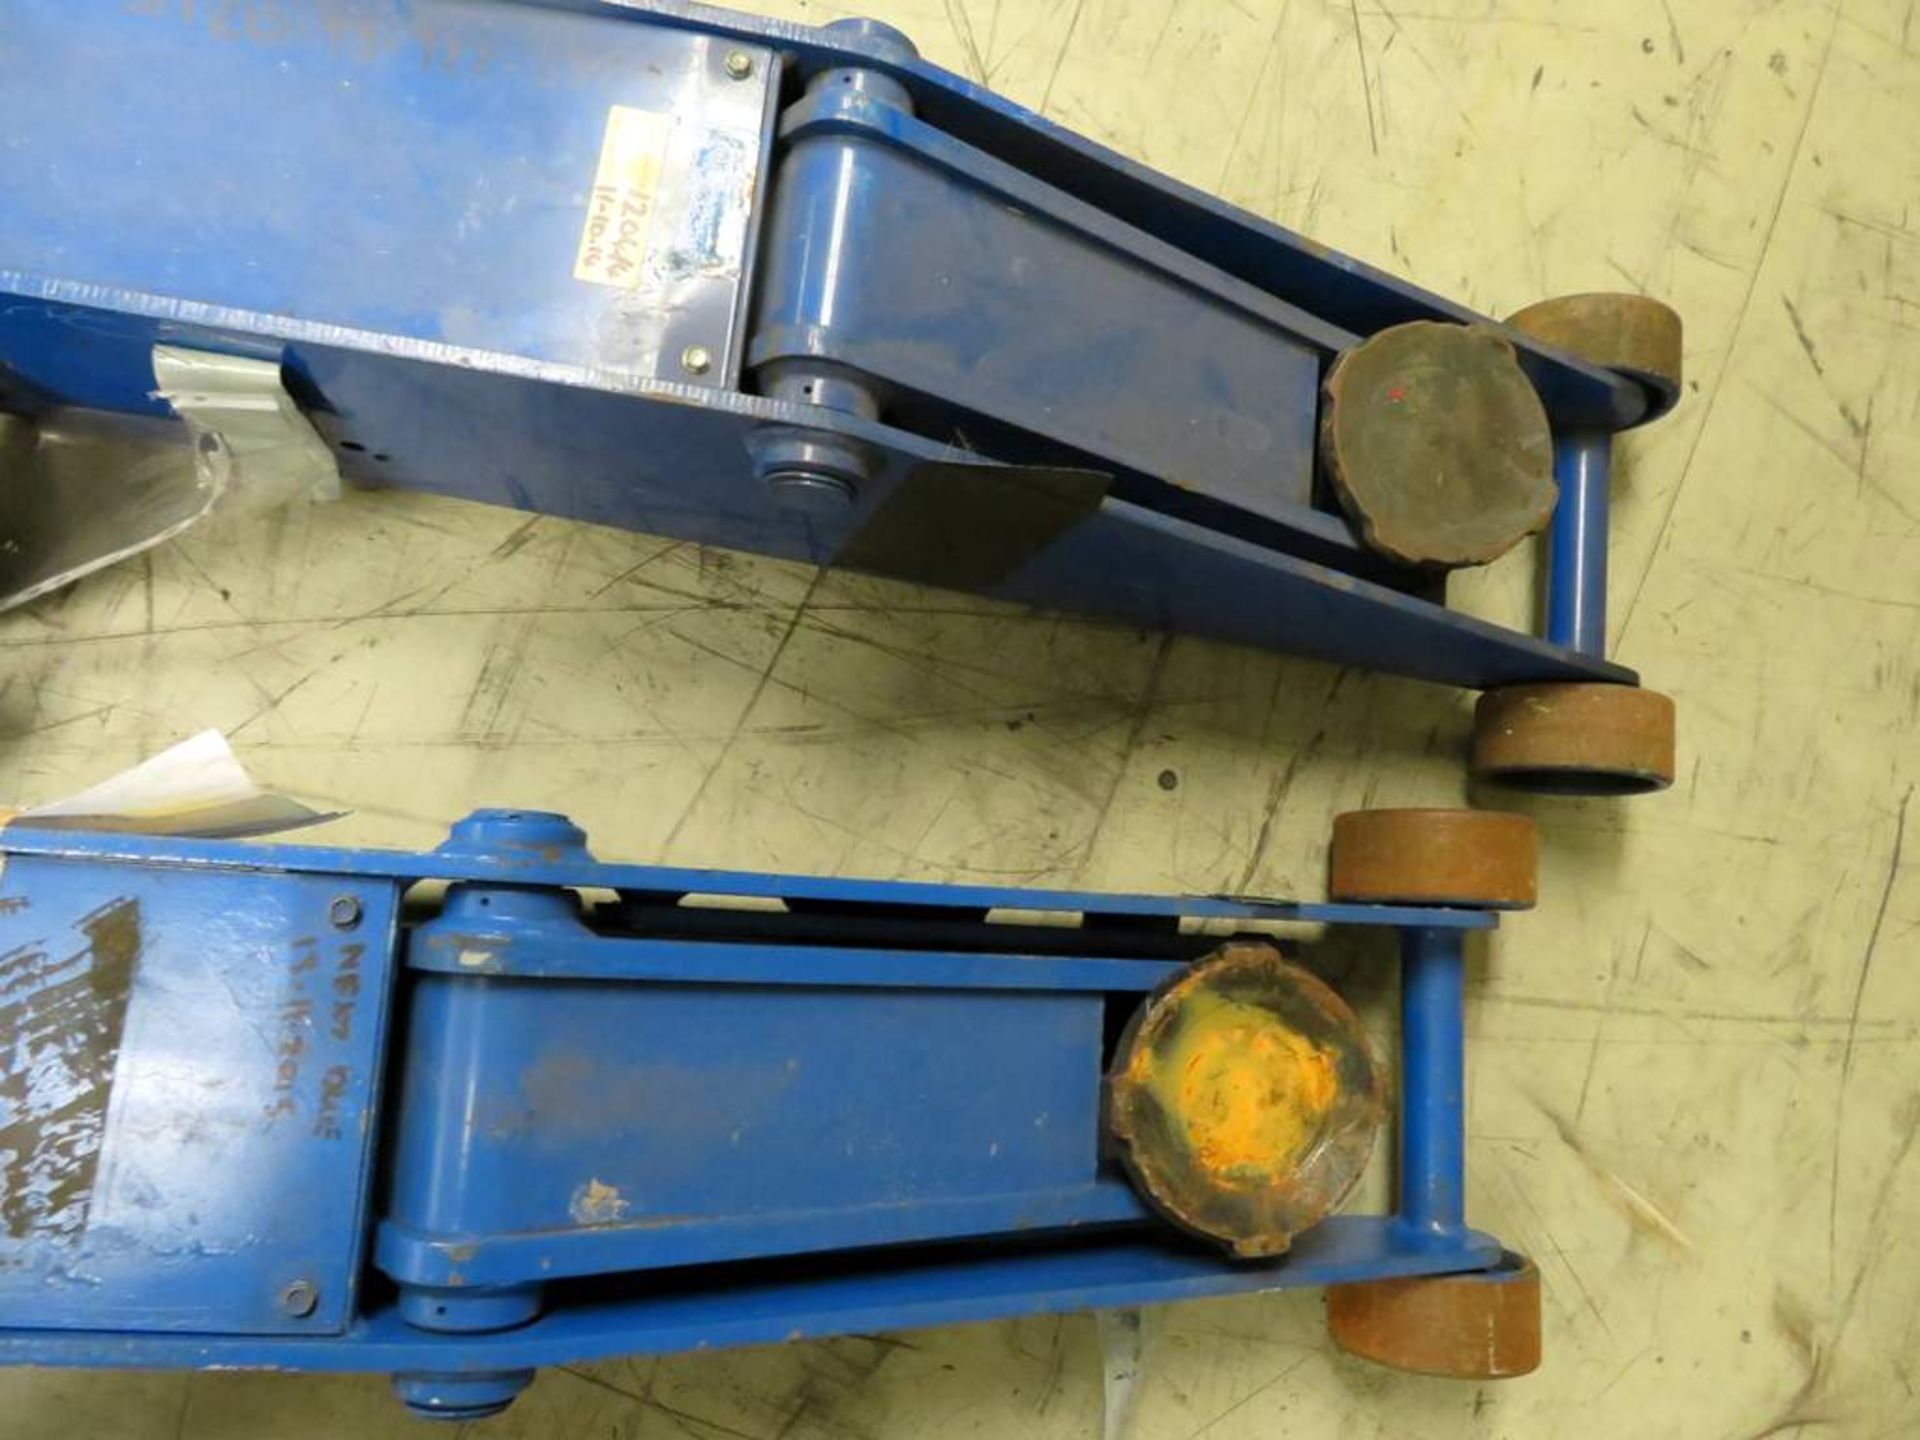 2x Weber 10 Tonne Vehicle Trolley Jacks Complete With Handle - WDK100LQ - Working Condition - Image 5 of 8